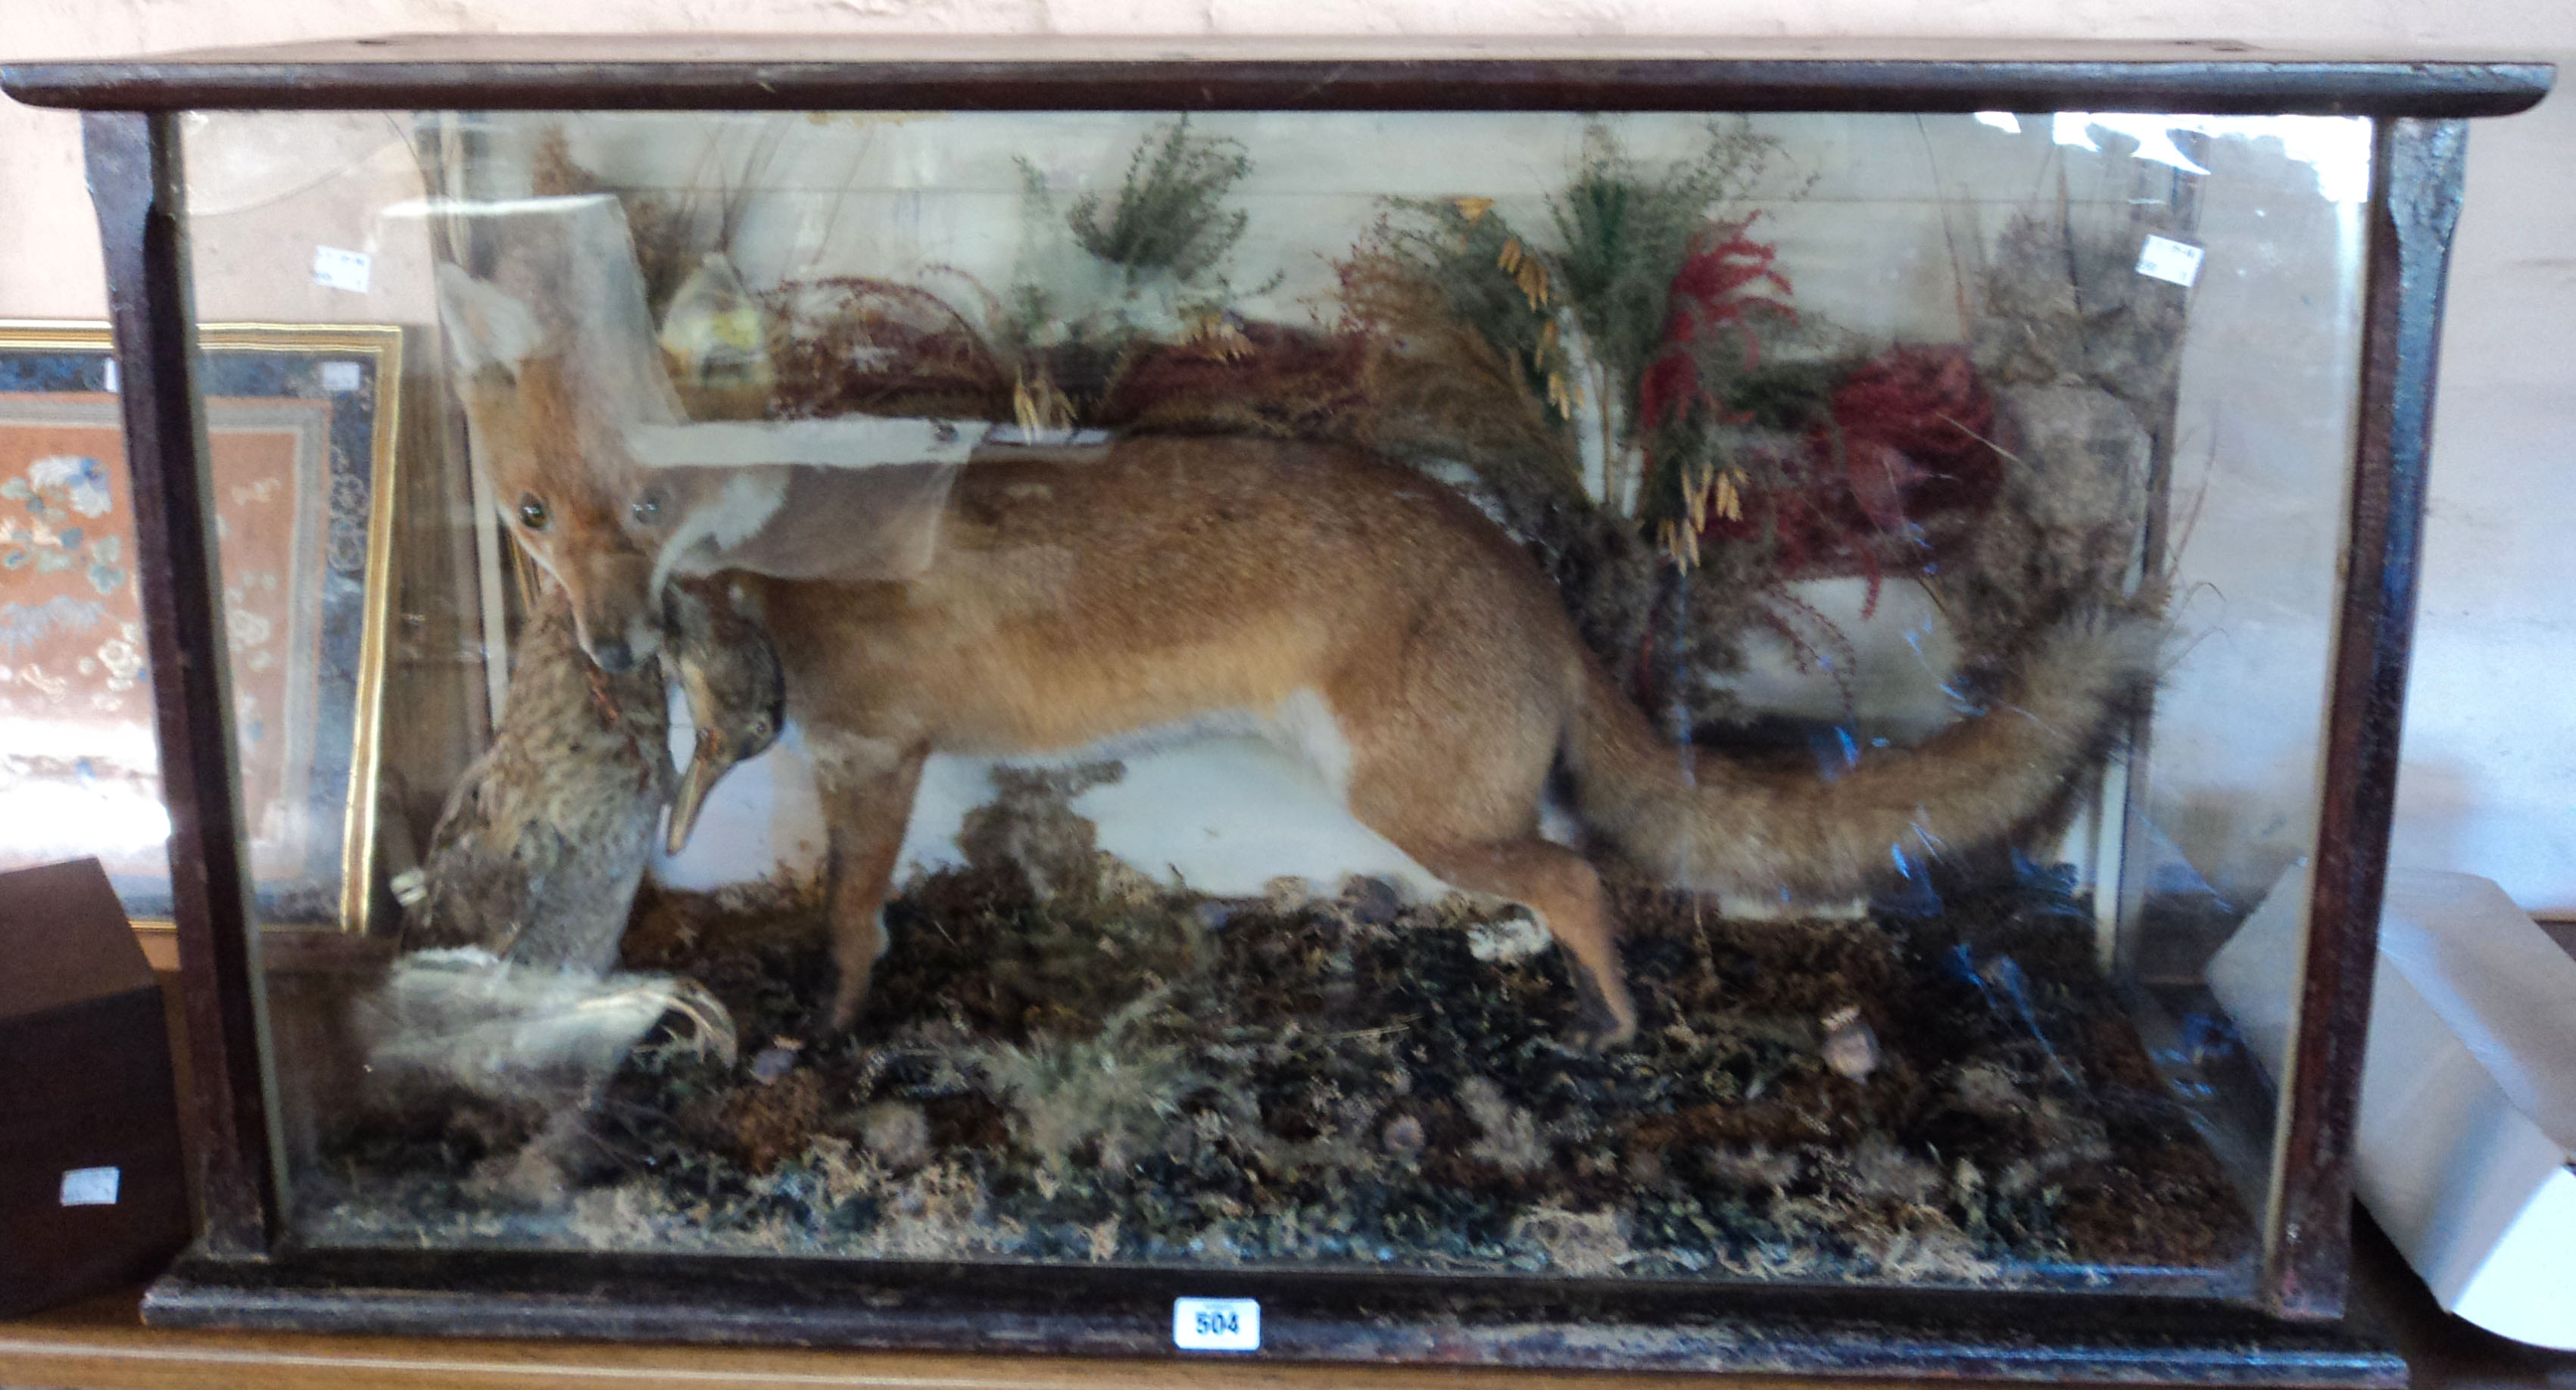 A 3' 4" antique display case containing a taxidermy study of a stuffed and mounted fox with duck